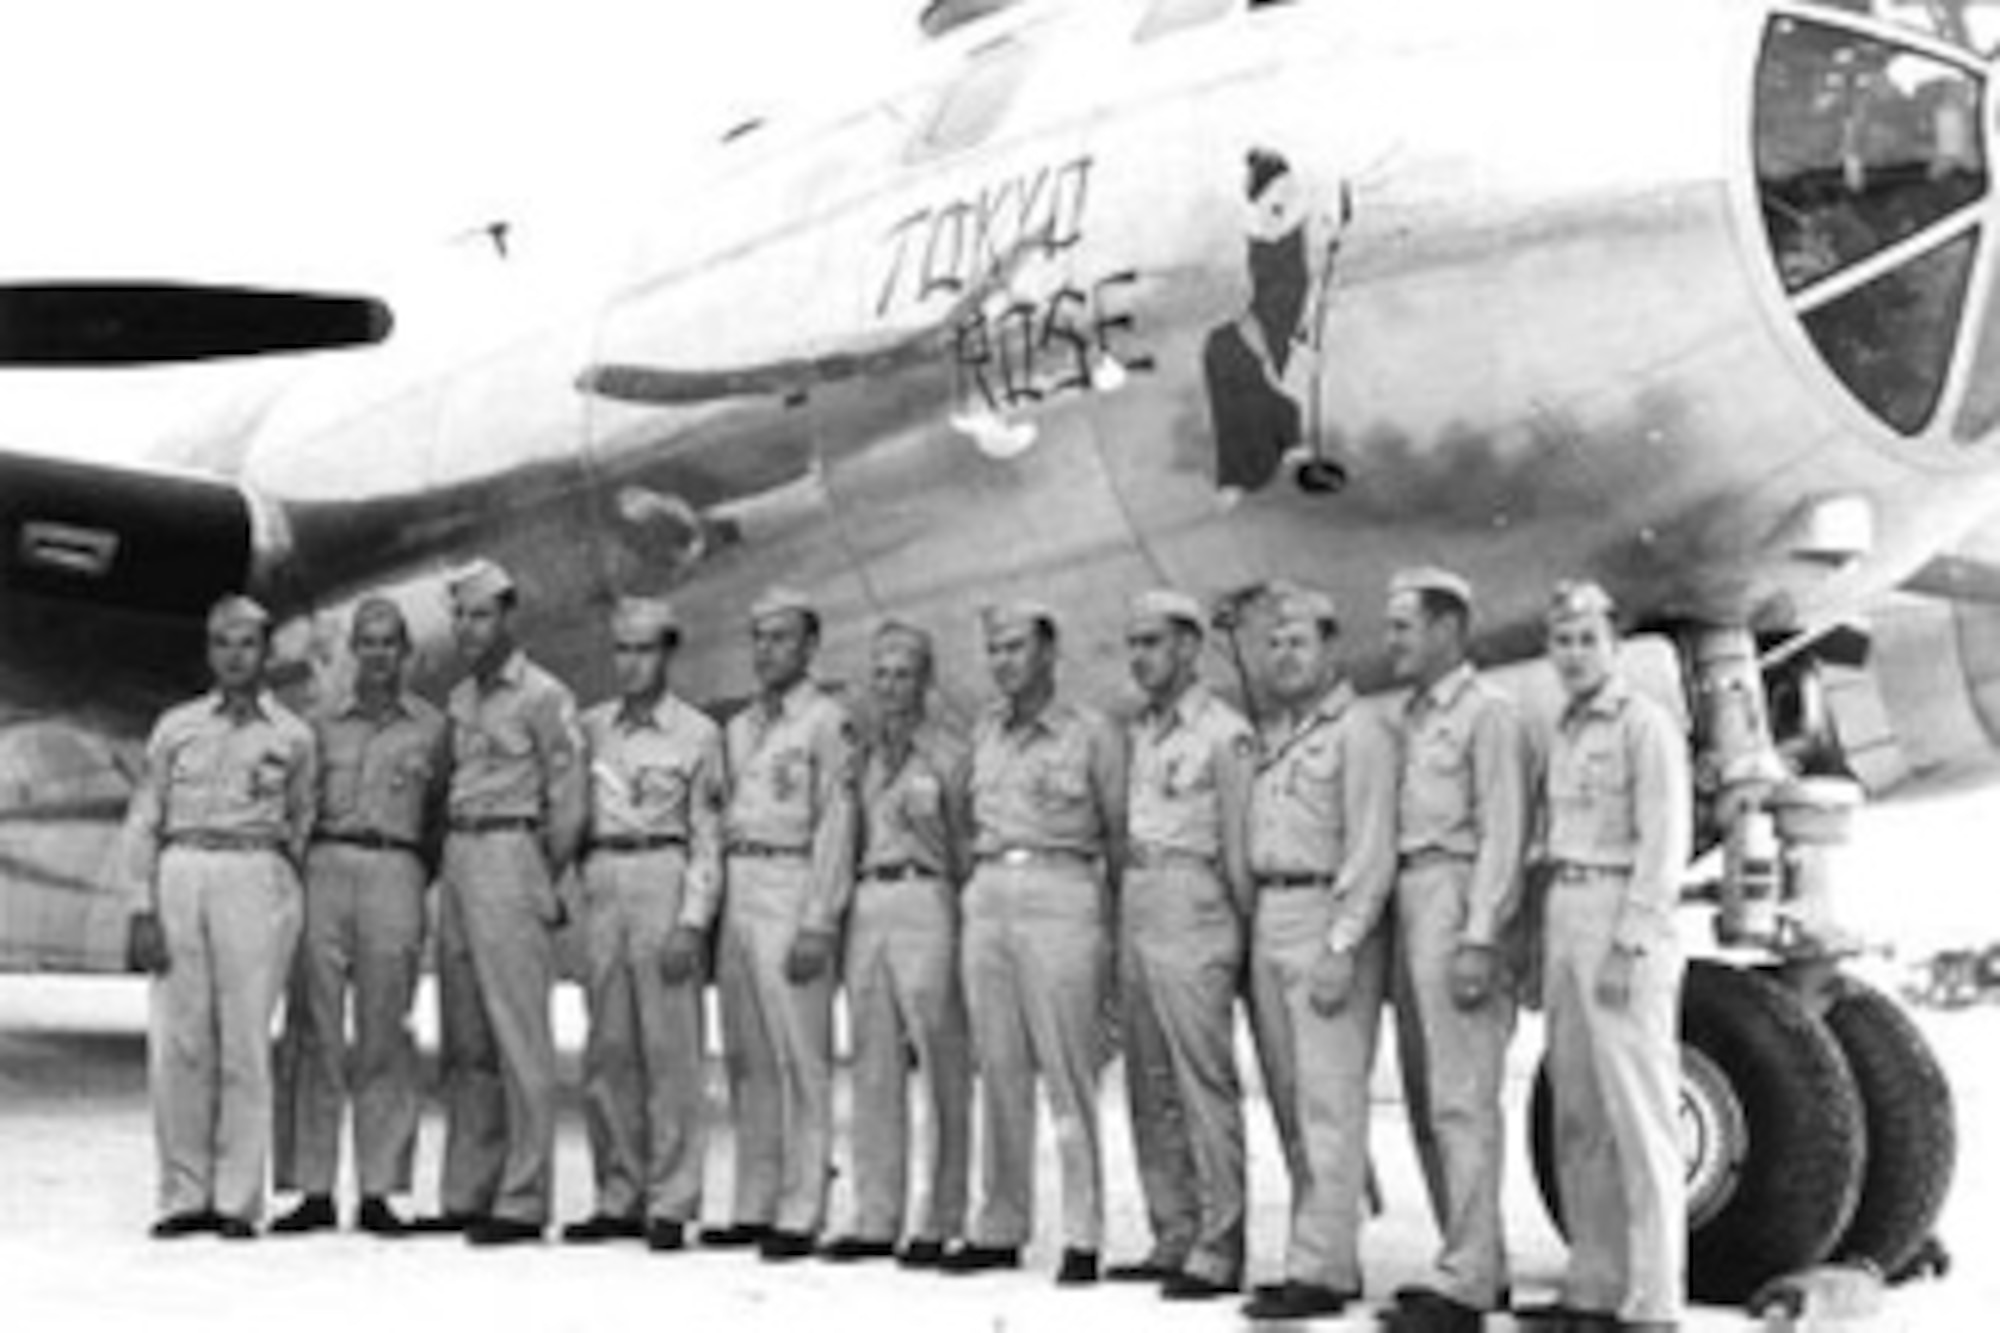 The photo depicts the crewmembers of the “Tokyo Rose” after receiving medals for the first photo reconnaissance mission over Tokyo, 1 Nov 44. It was the first U.S. aircraft over Tokyo since Doolittle’s Raid 2½ years earlier. (Photo from Col. Richard M. Hutchins, USAF-Ret)